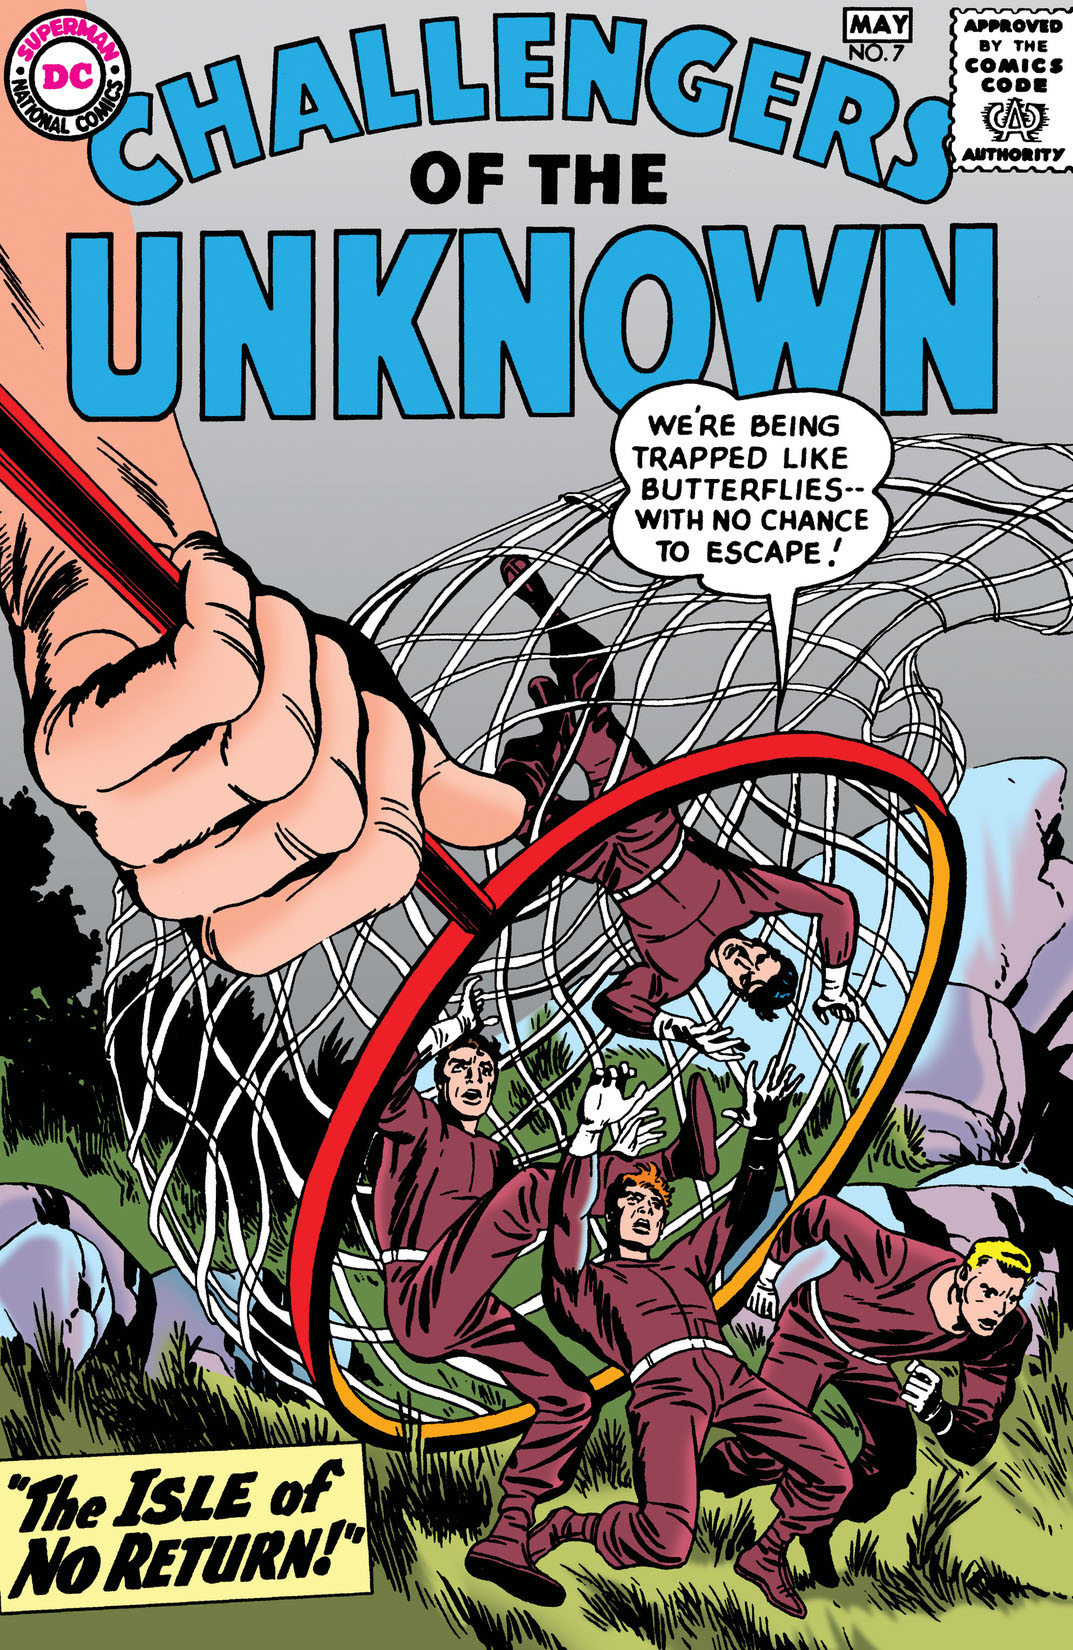 Challengers of the Unknown (1958-) #7 preview images